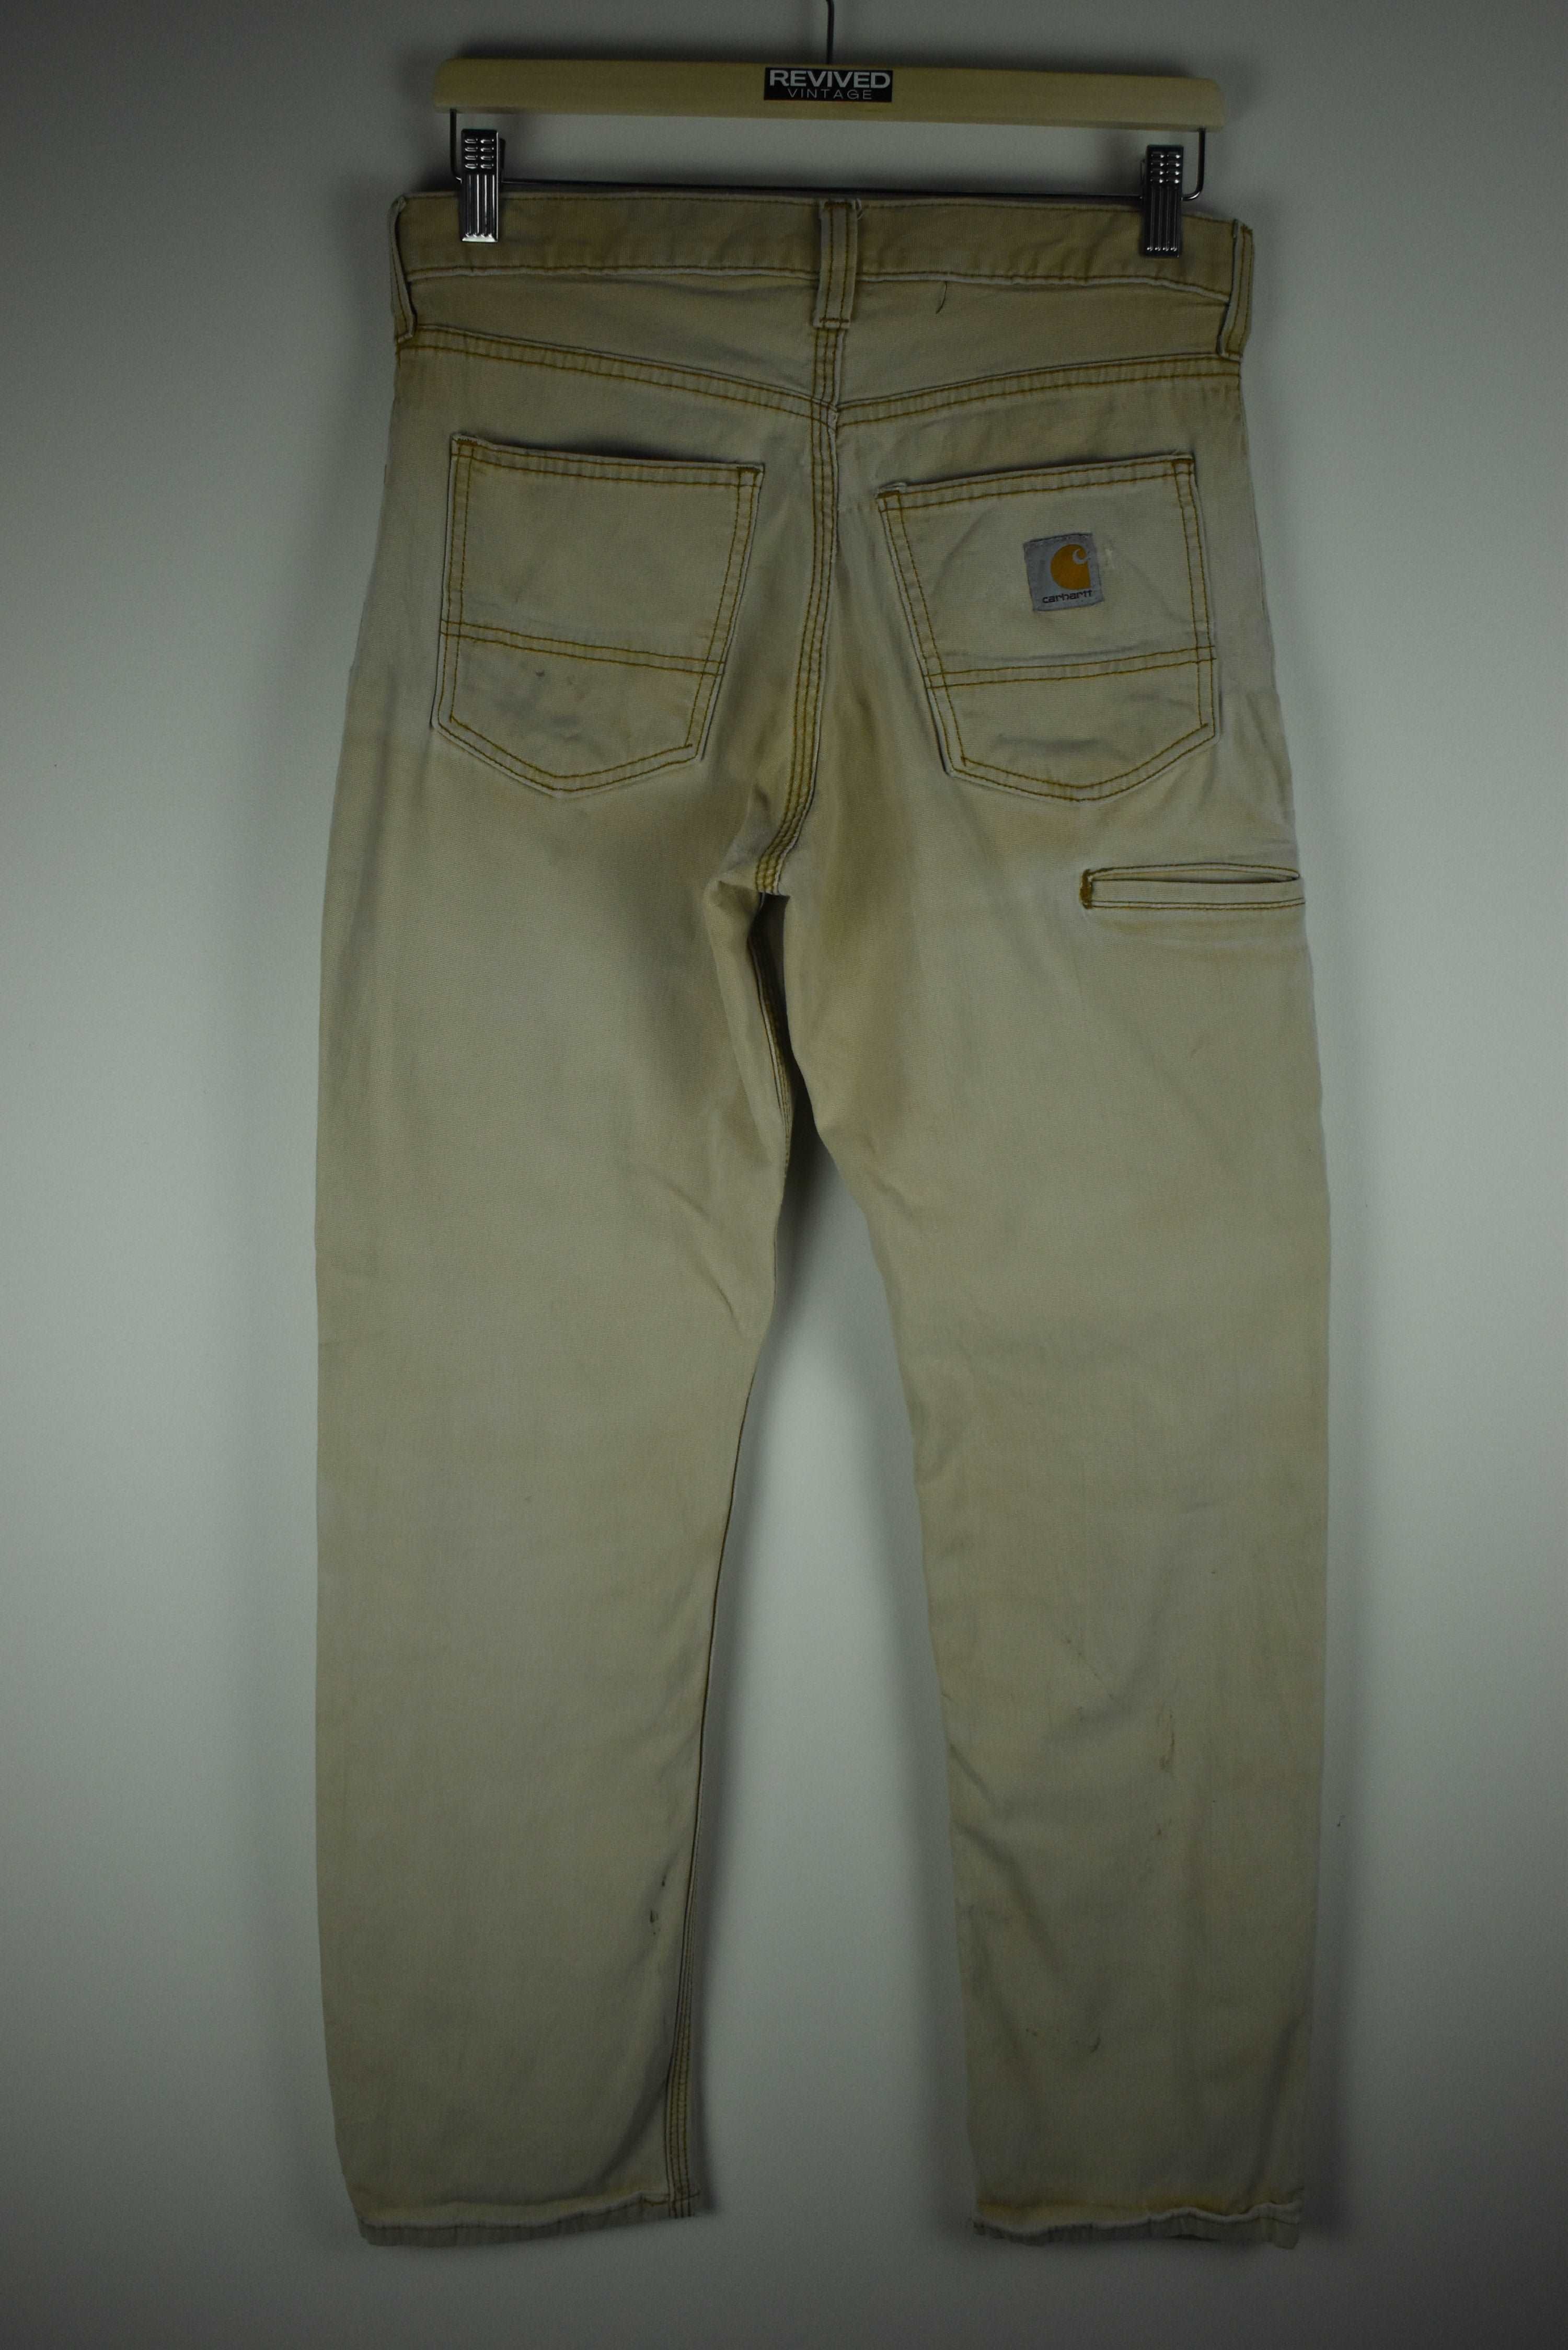 Vintage Carhartt Classic Jeans Relaxed Fit 30 x 30